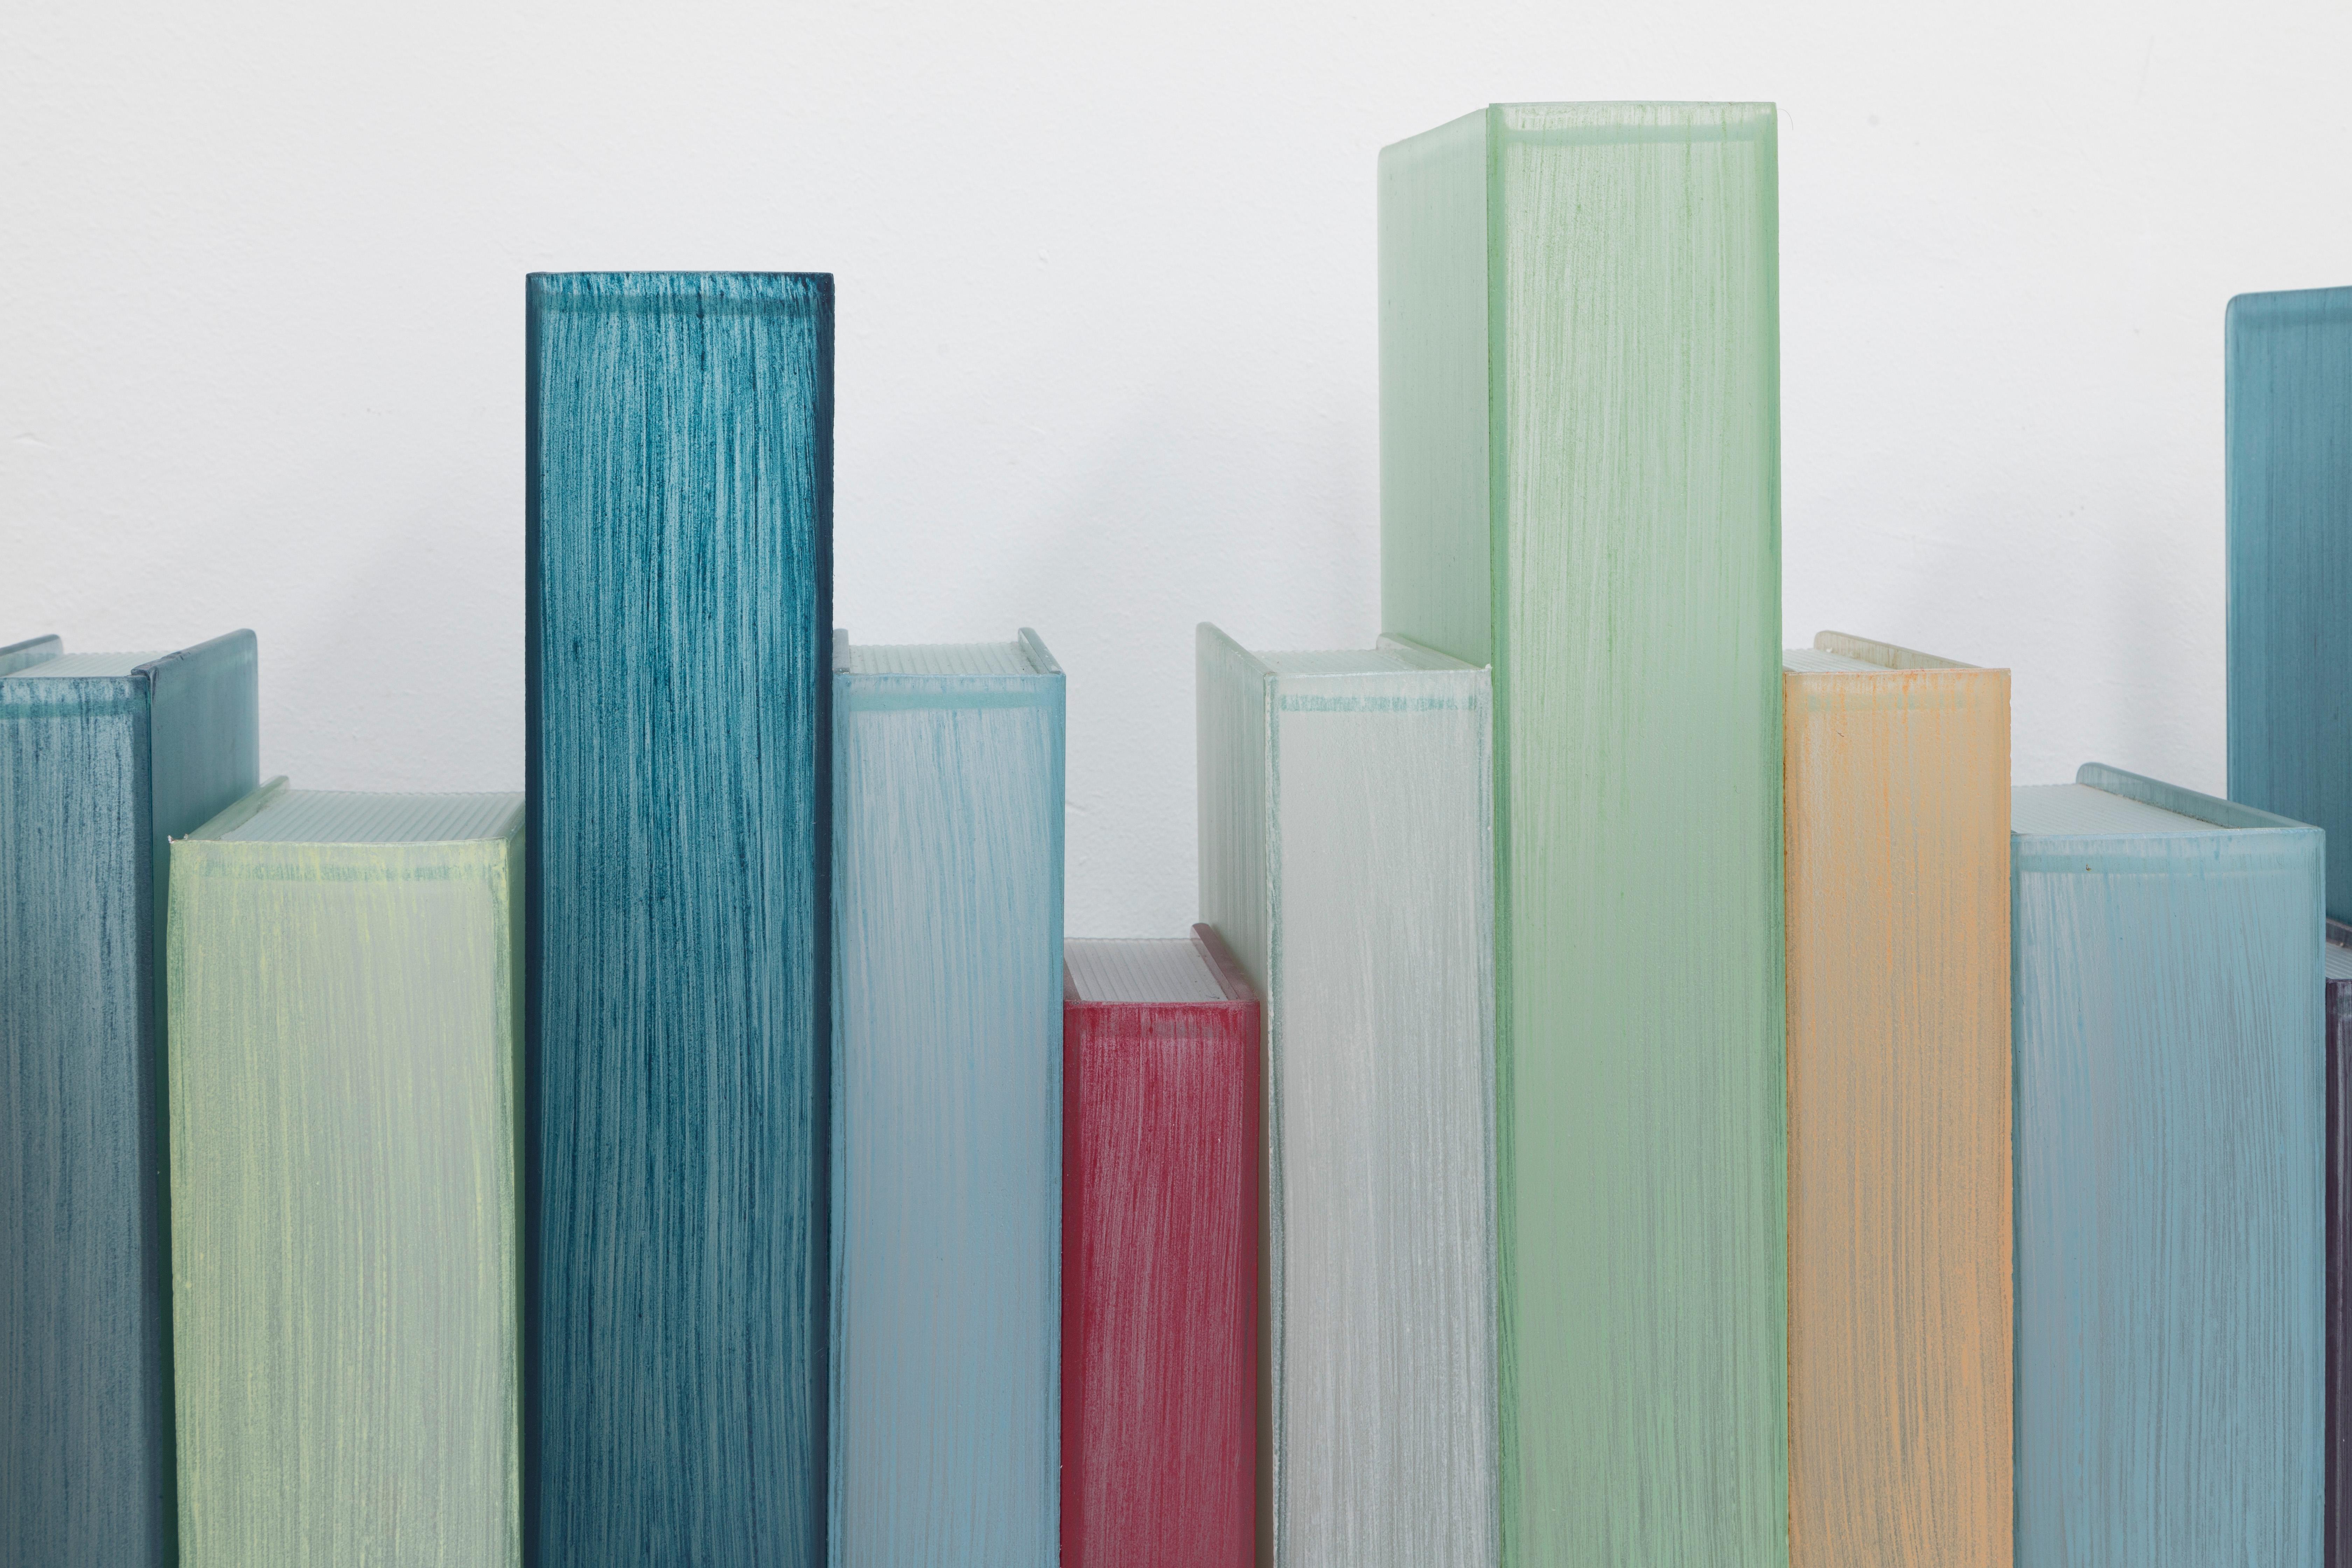 The series “Enlightening Books” by the Italian artist Chiara Dynys is one of her most representative artworks. Presented for the first time at La Galleria Nazionale in Rome, the artwork has distinguished Chiara Dynys' poetics for the last ten years,